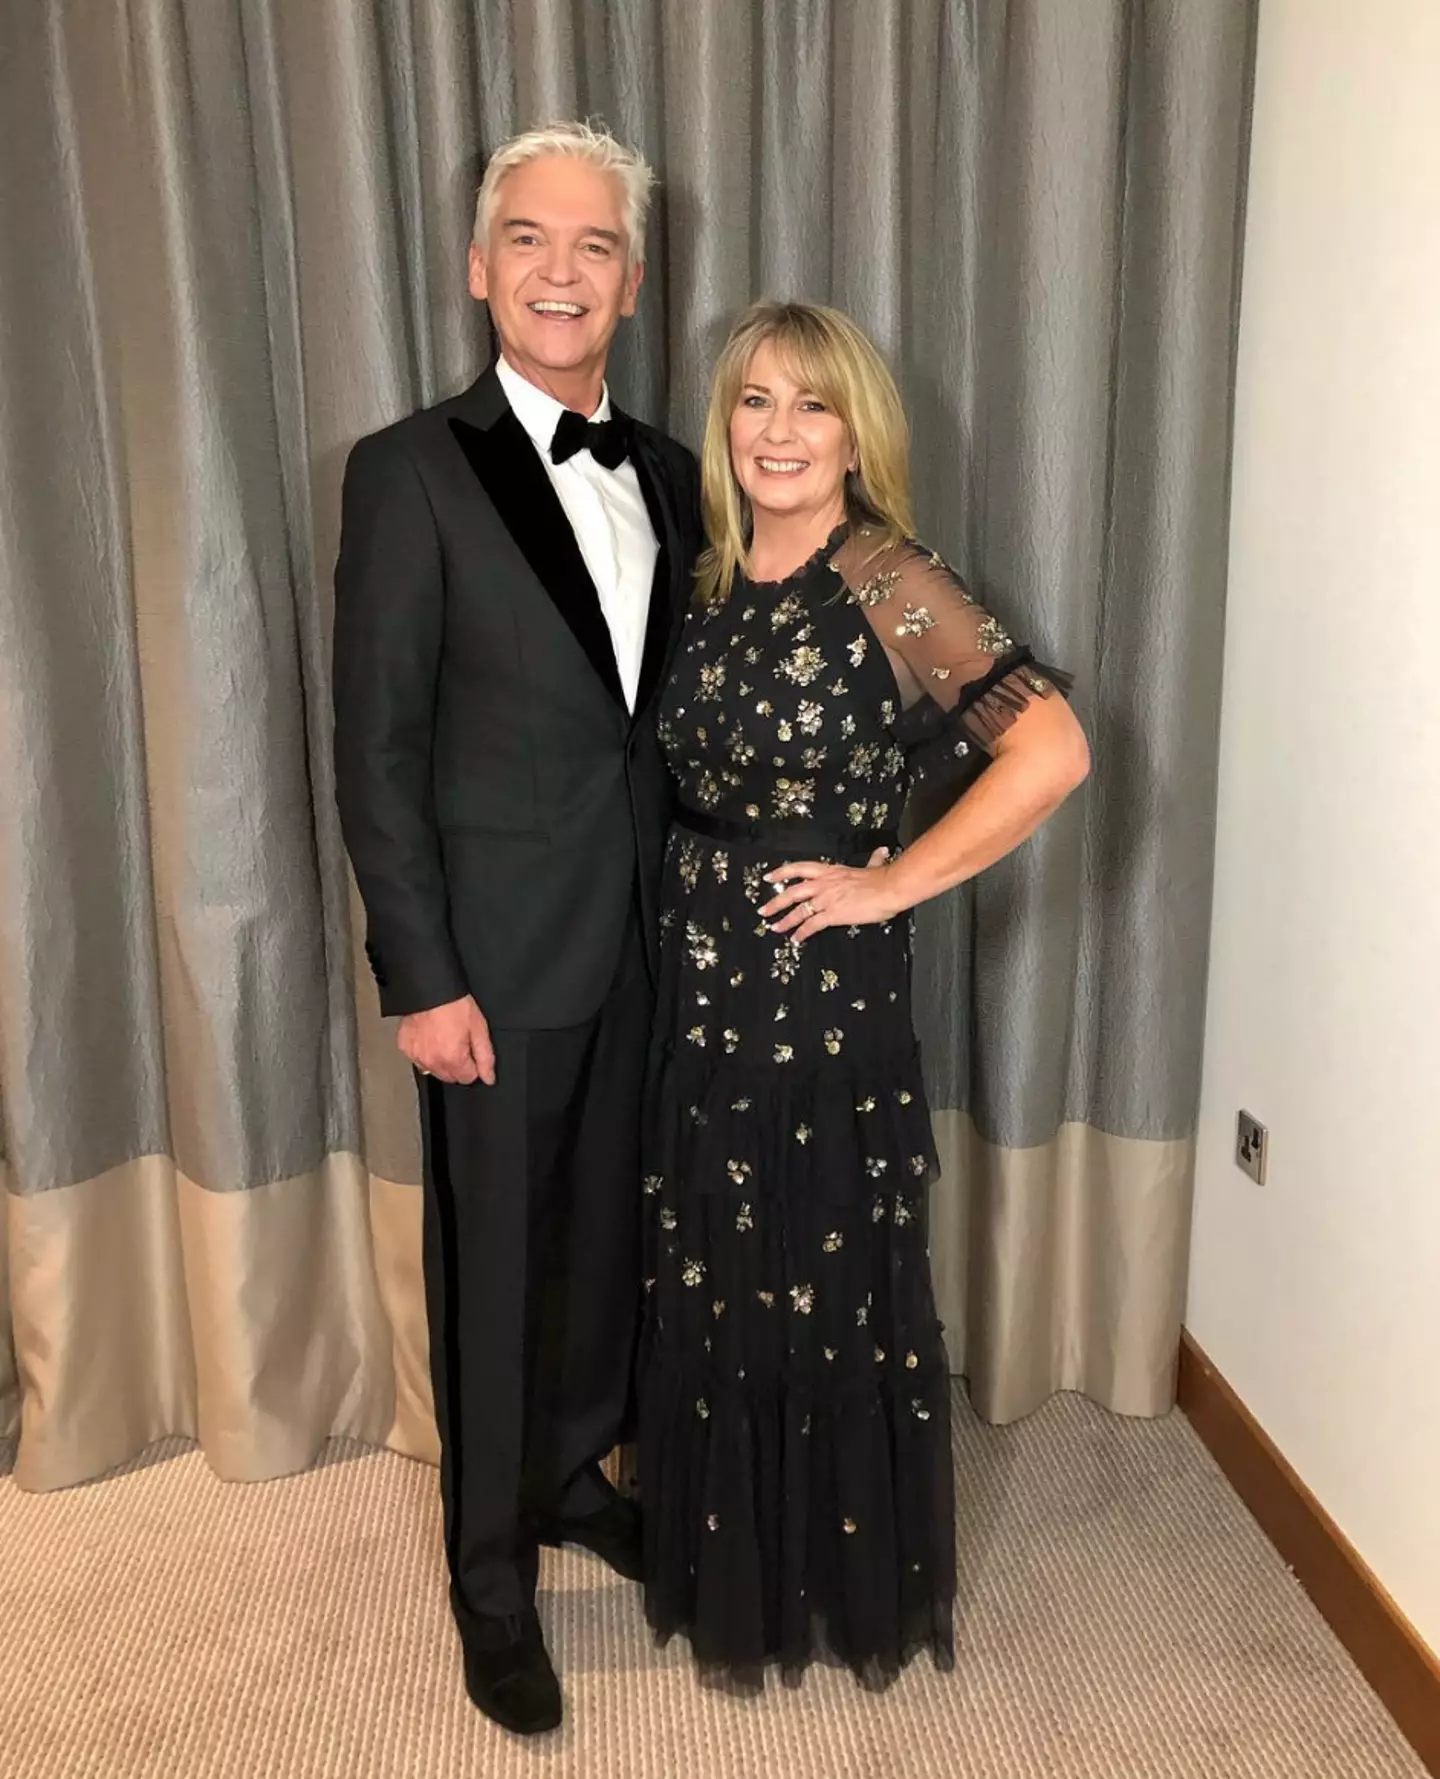 Phillip Schofield and Stephanie Lowe have been married for 30 years and share two daughters together.